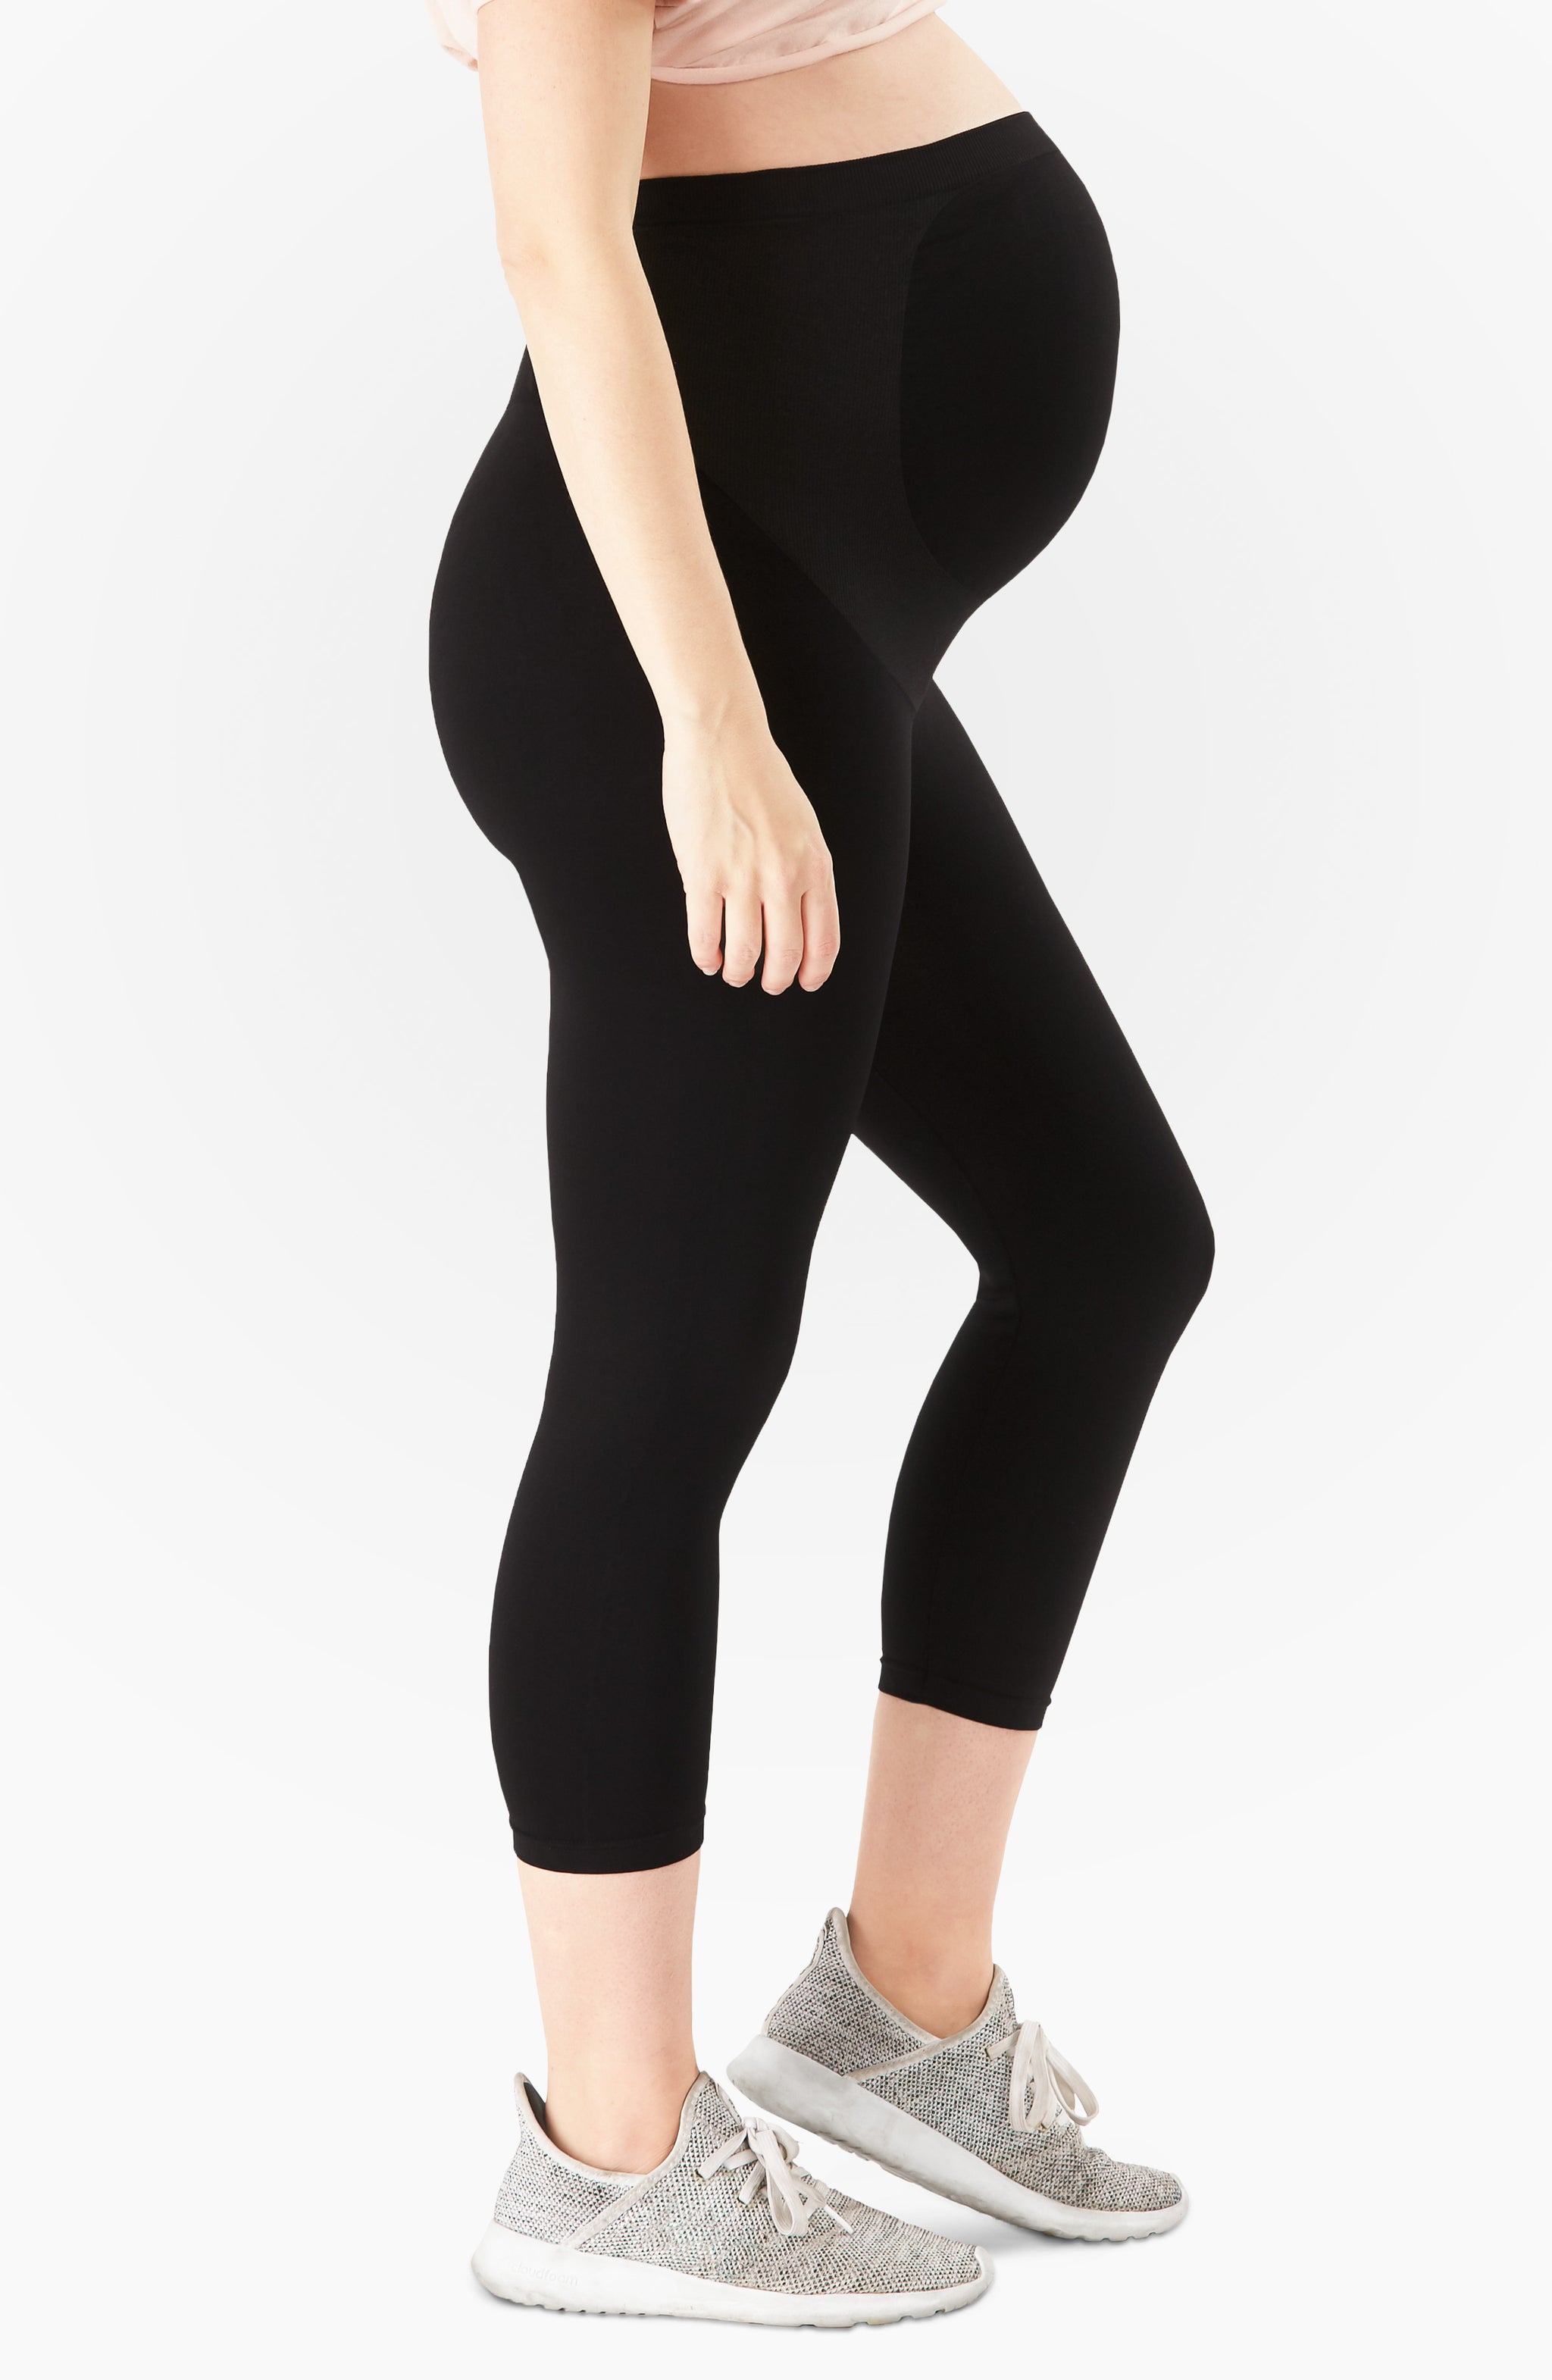 Best Compression Leggings for 2022 - Compression Tights for